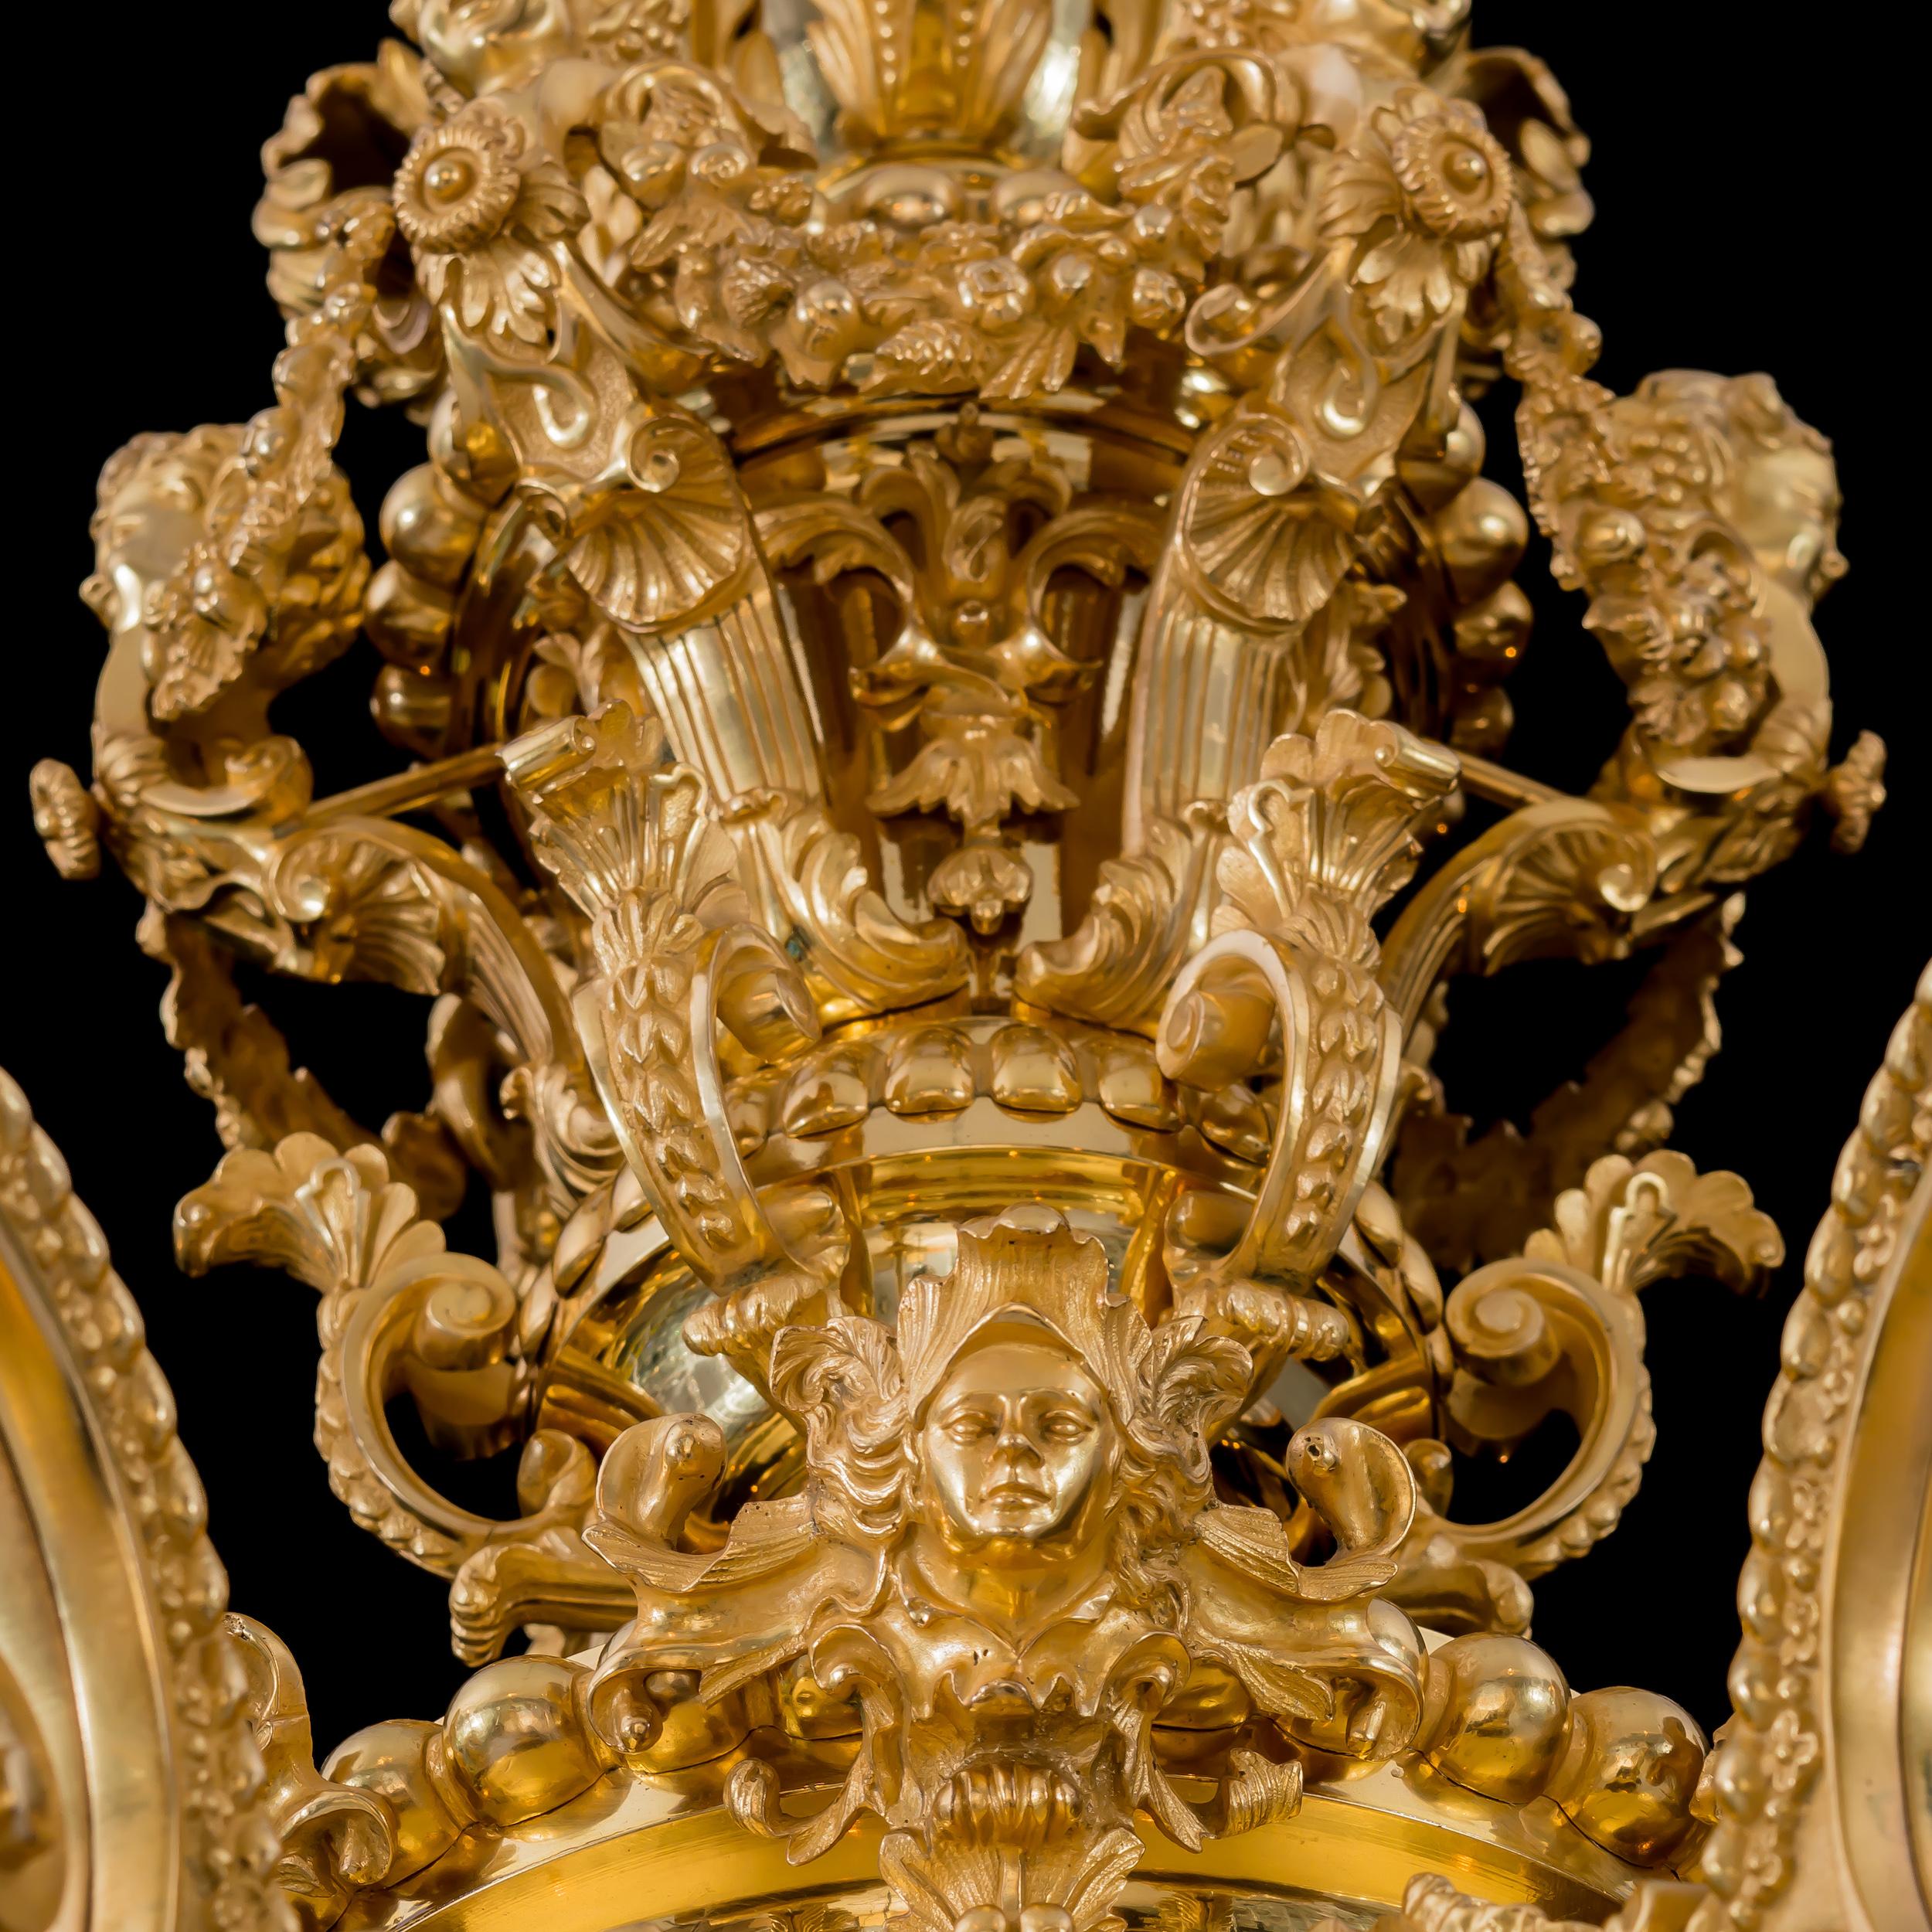 19th Century Magnificent George IV Period Ormolu Chandelier by Messenger & Phipson For Sale